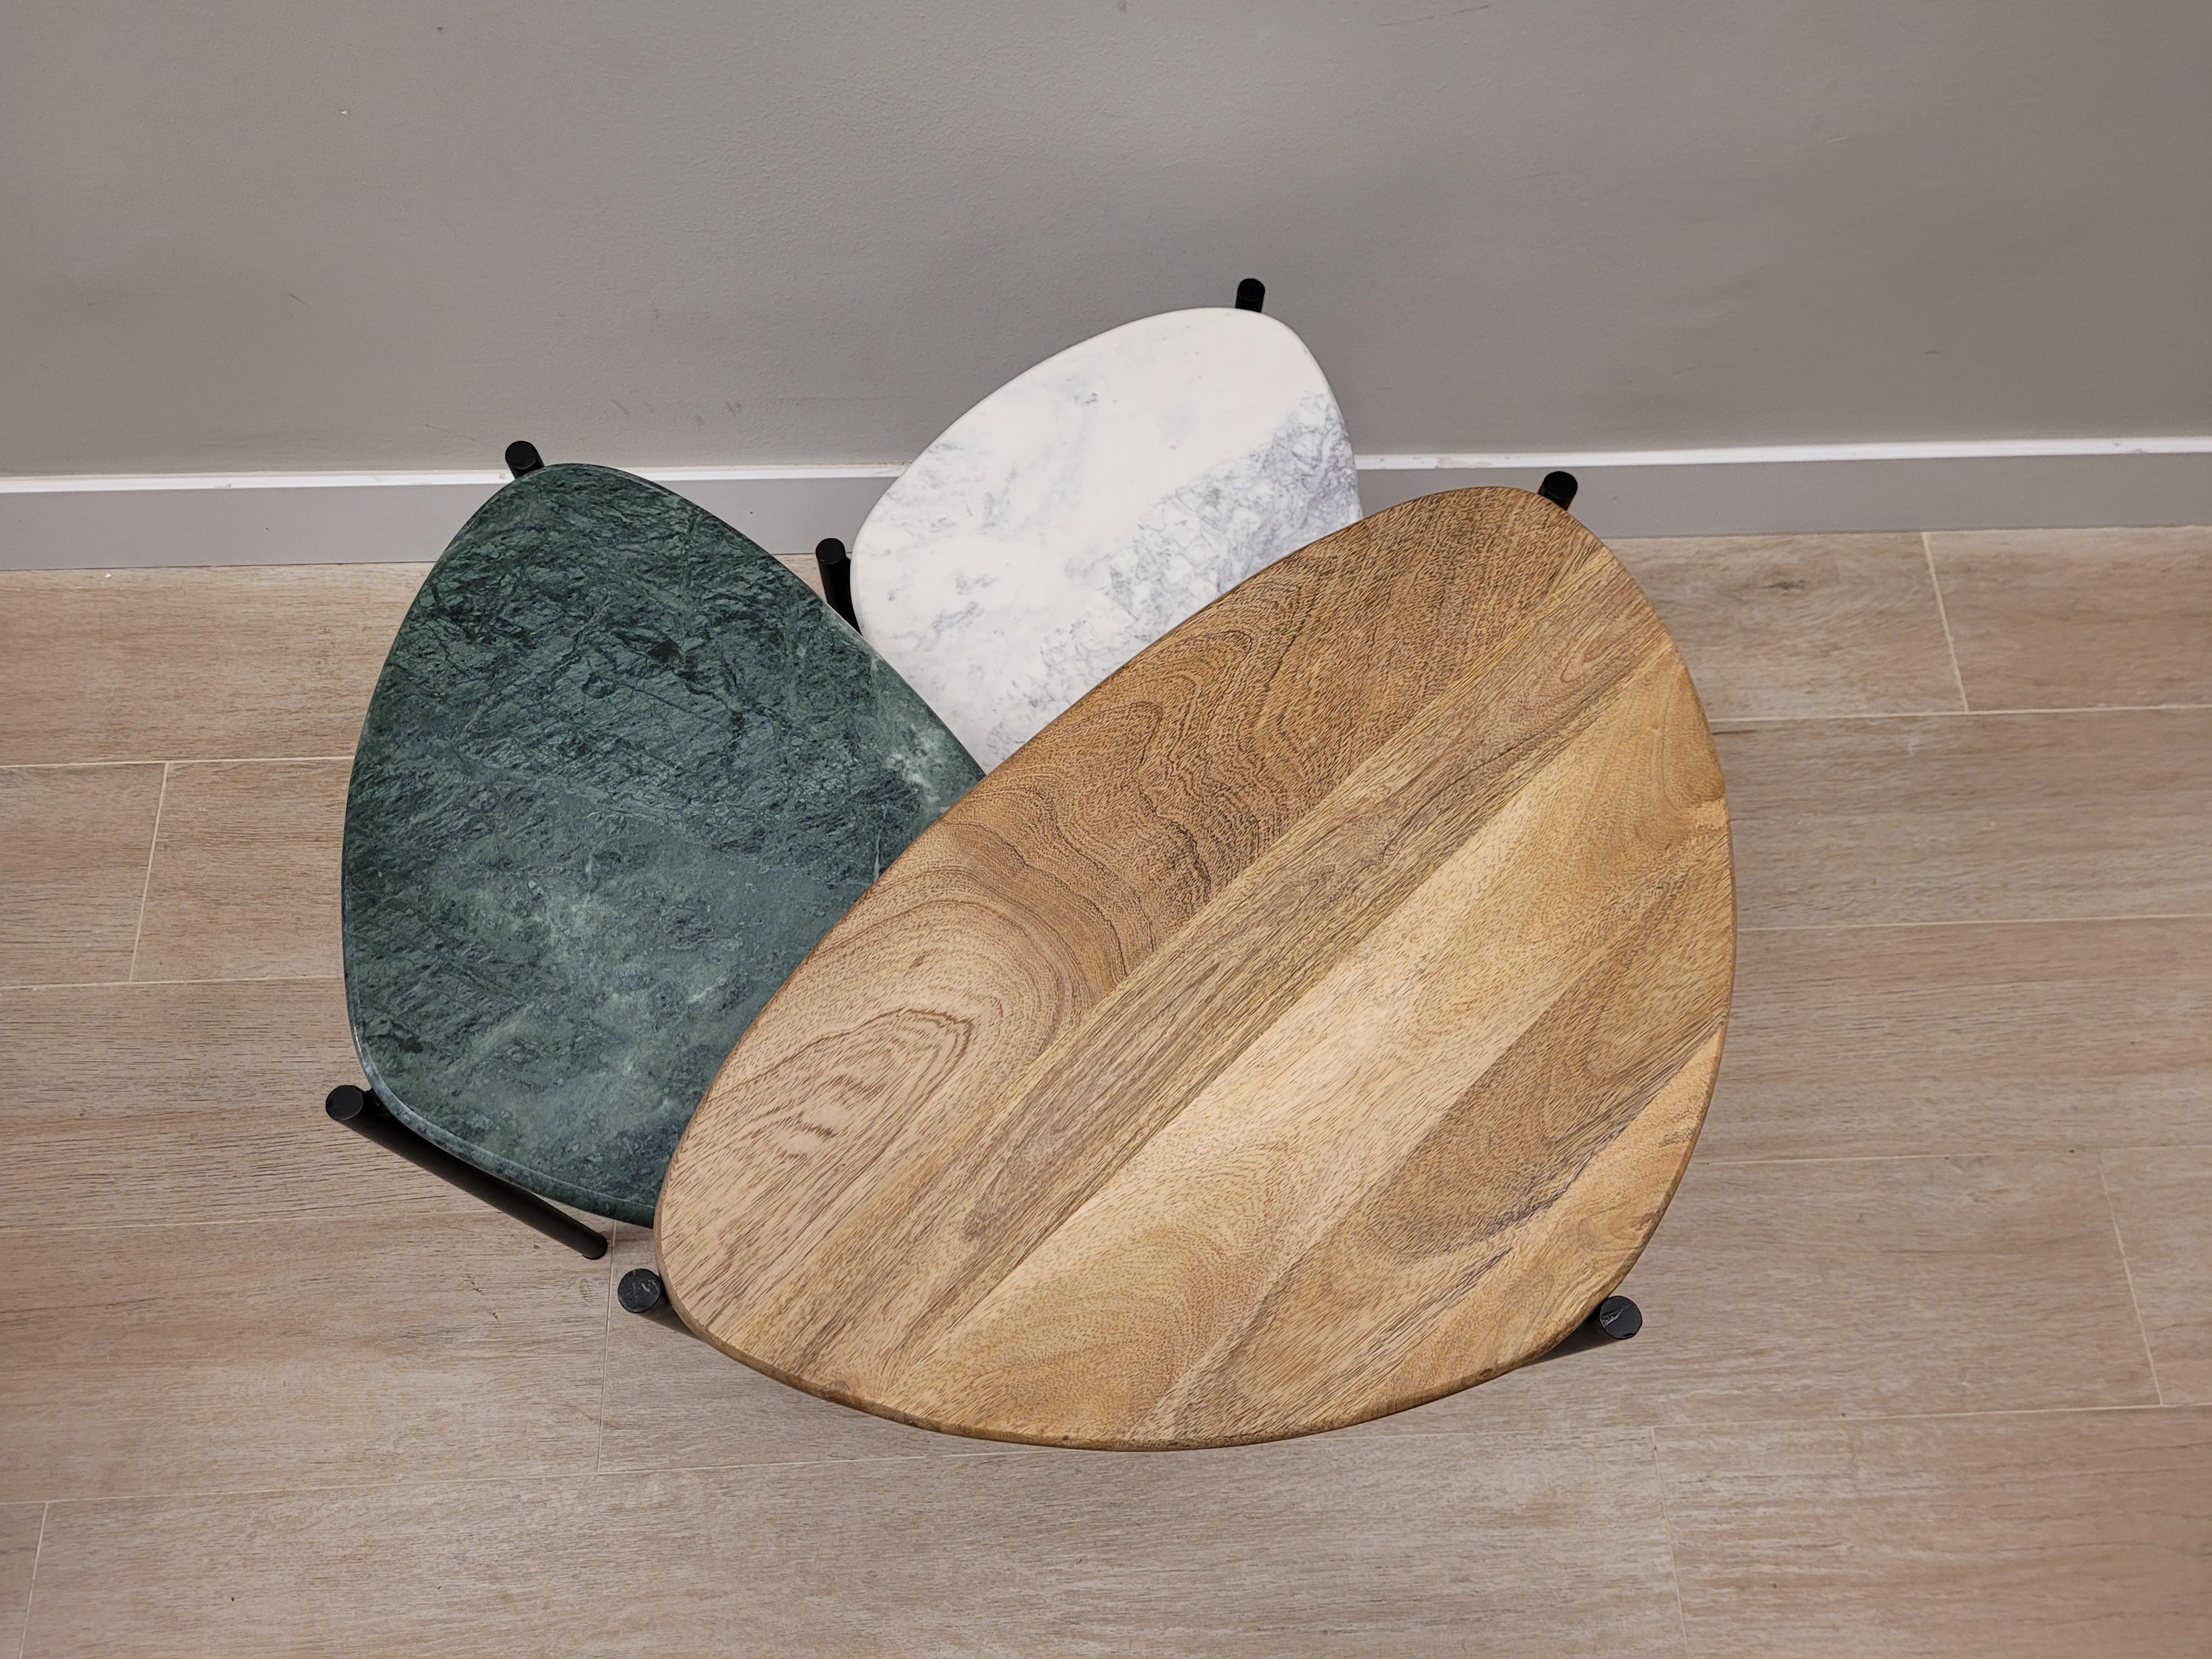 Set of 3 End-Tables Green, White Marble and Wood 21st Century, Side Table 7